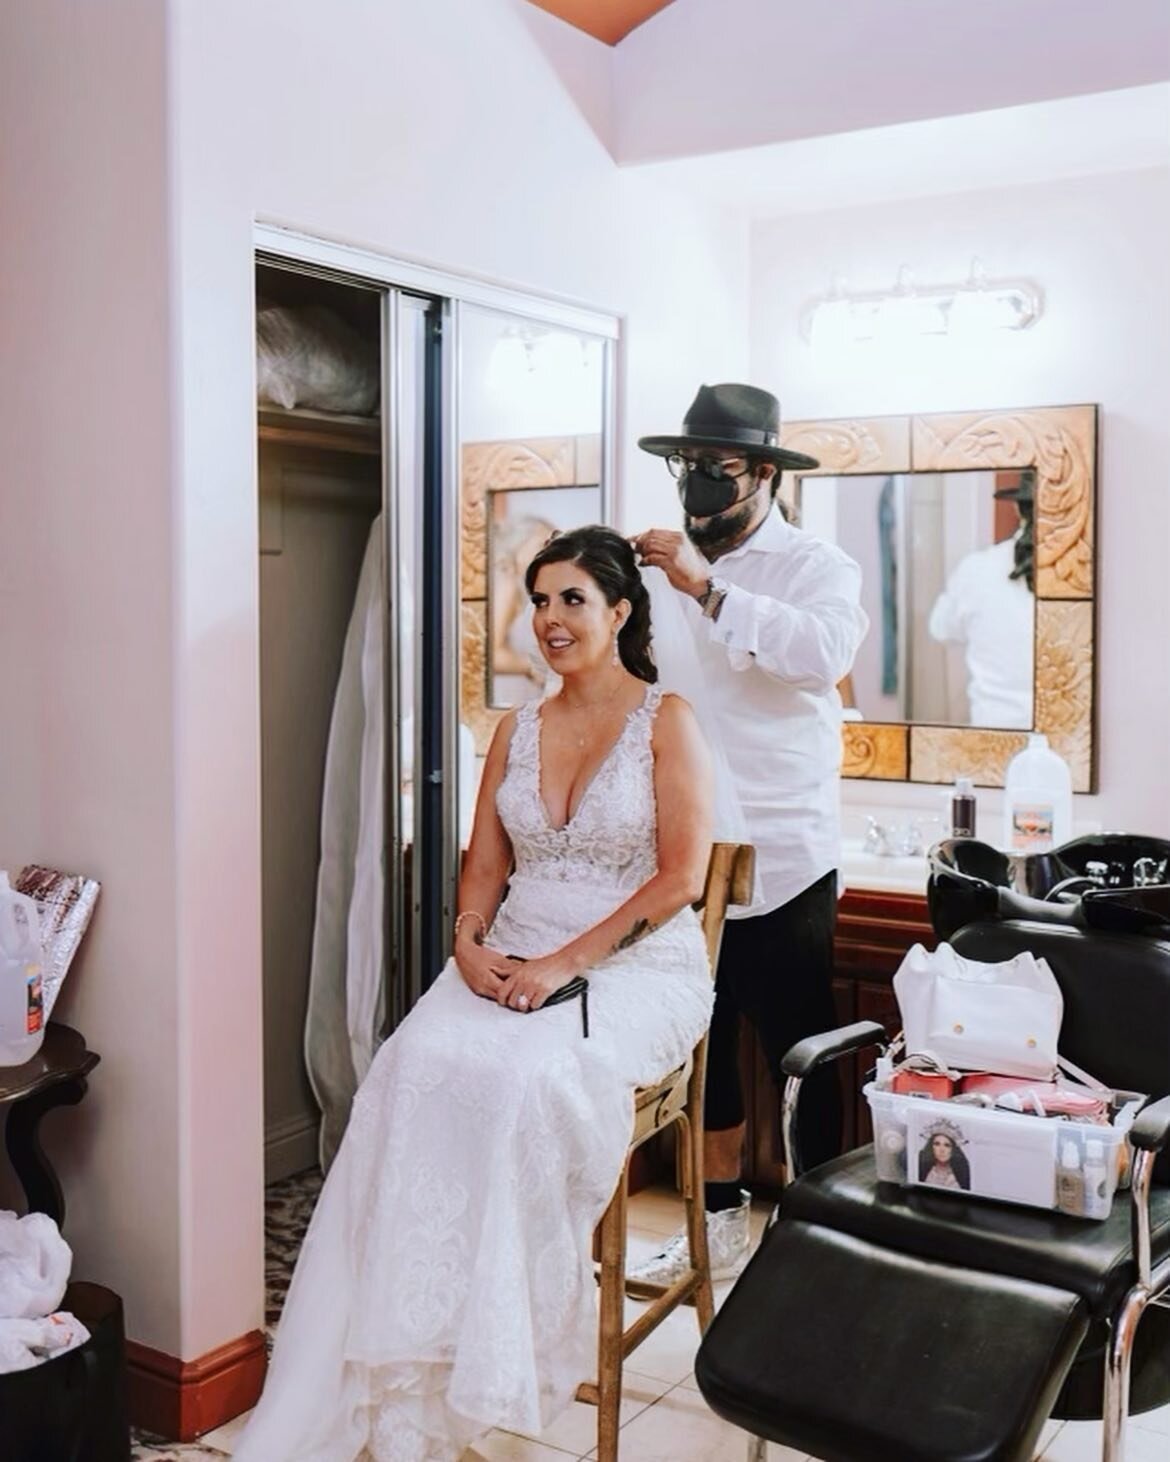 When you hair and makeup is on point, nothing can stop your big day! 💄💍👰&zwj;♀️ Hair &amp; makeup by John (@galindodesigns) and Gina (@chingonabeauty_bygigi )
.
.
.
#ModniHairLounge #BeFreeBeYouBeModni #BeModni #lodi #lodihair #lodihairstylist #lo